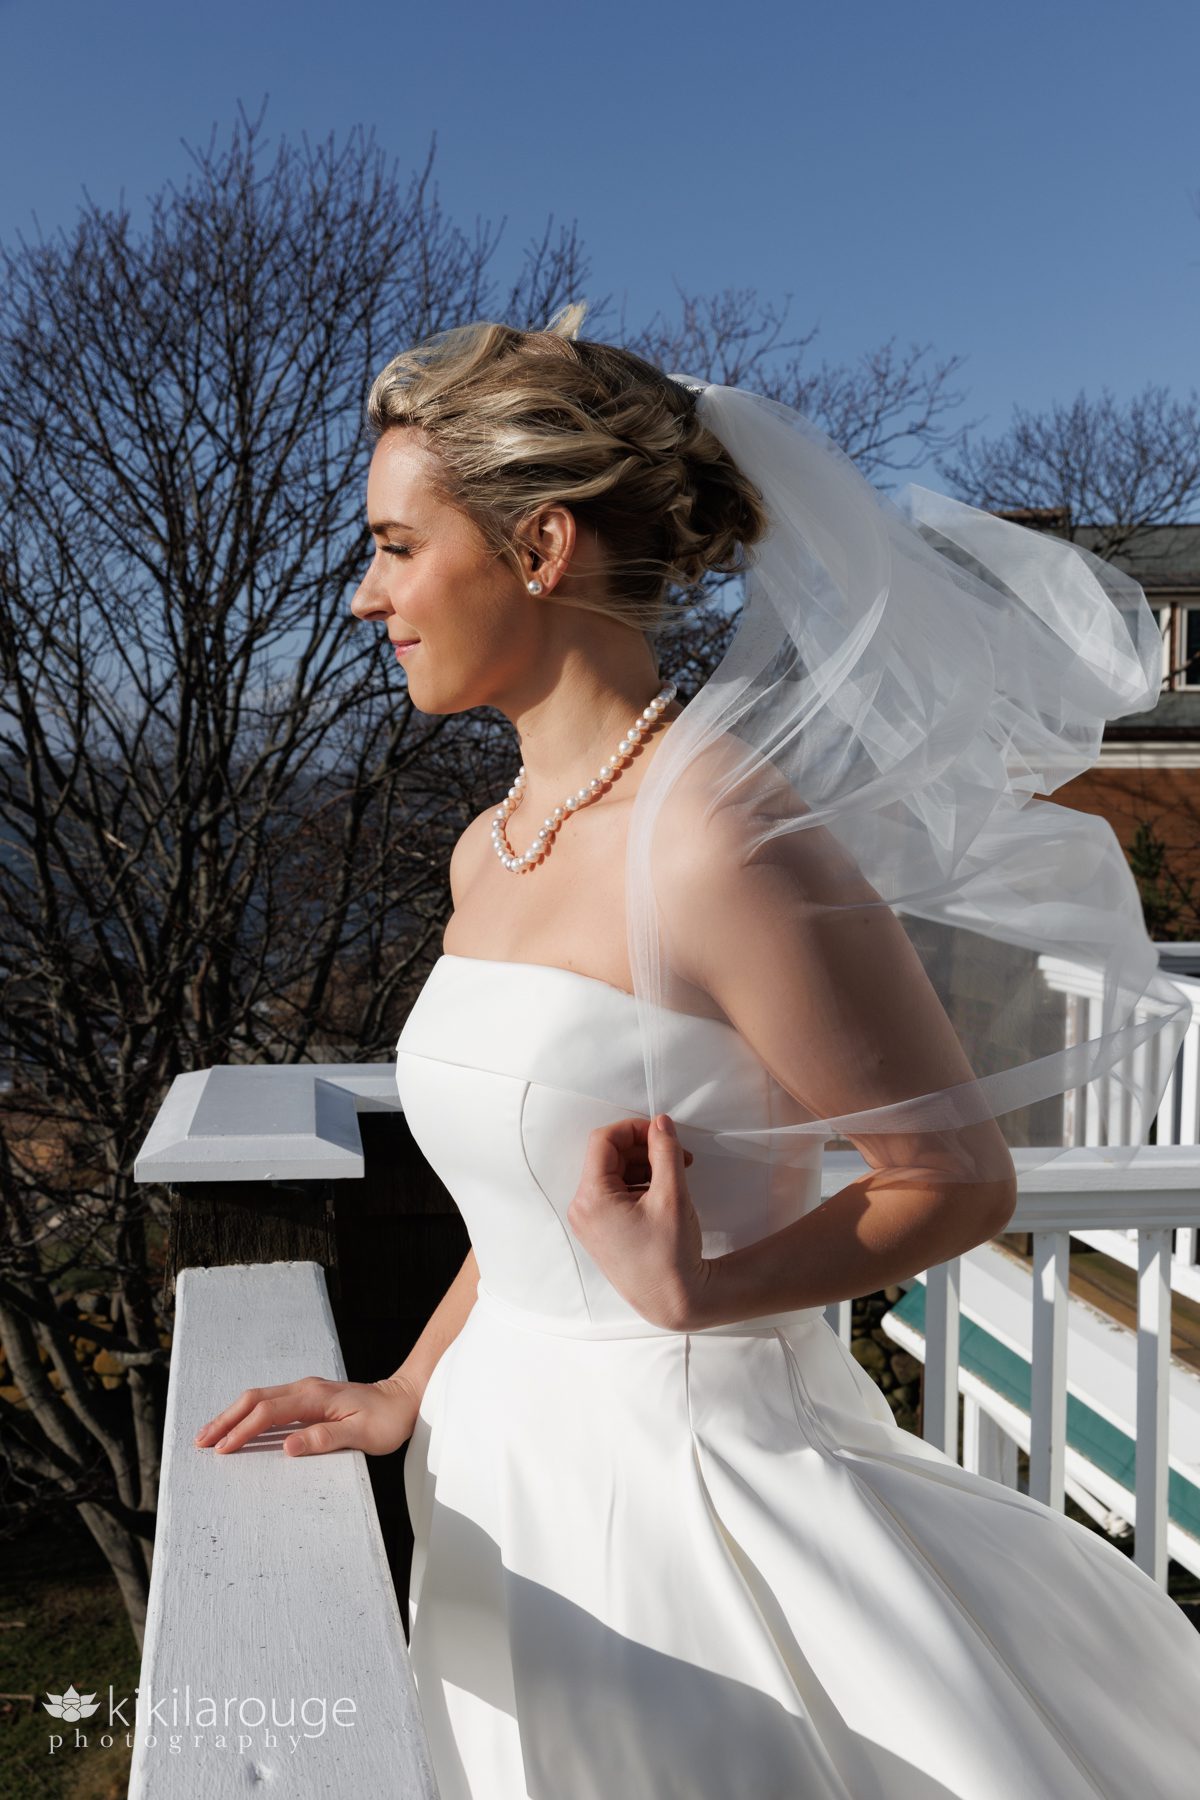 Profile of bride standing at the edge of a deck with the wind blowing hair and veil